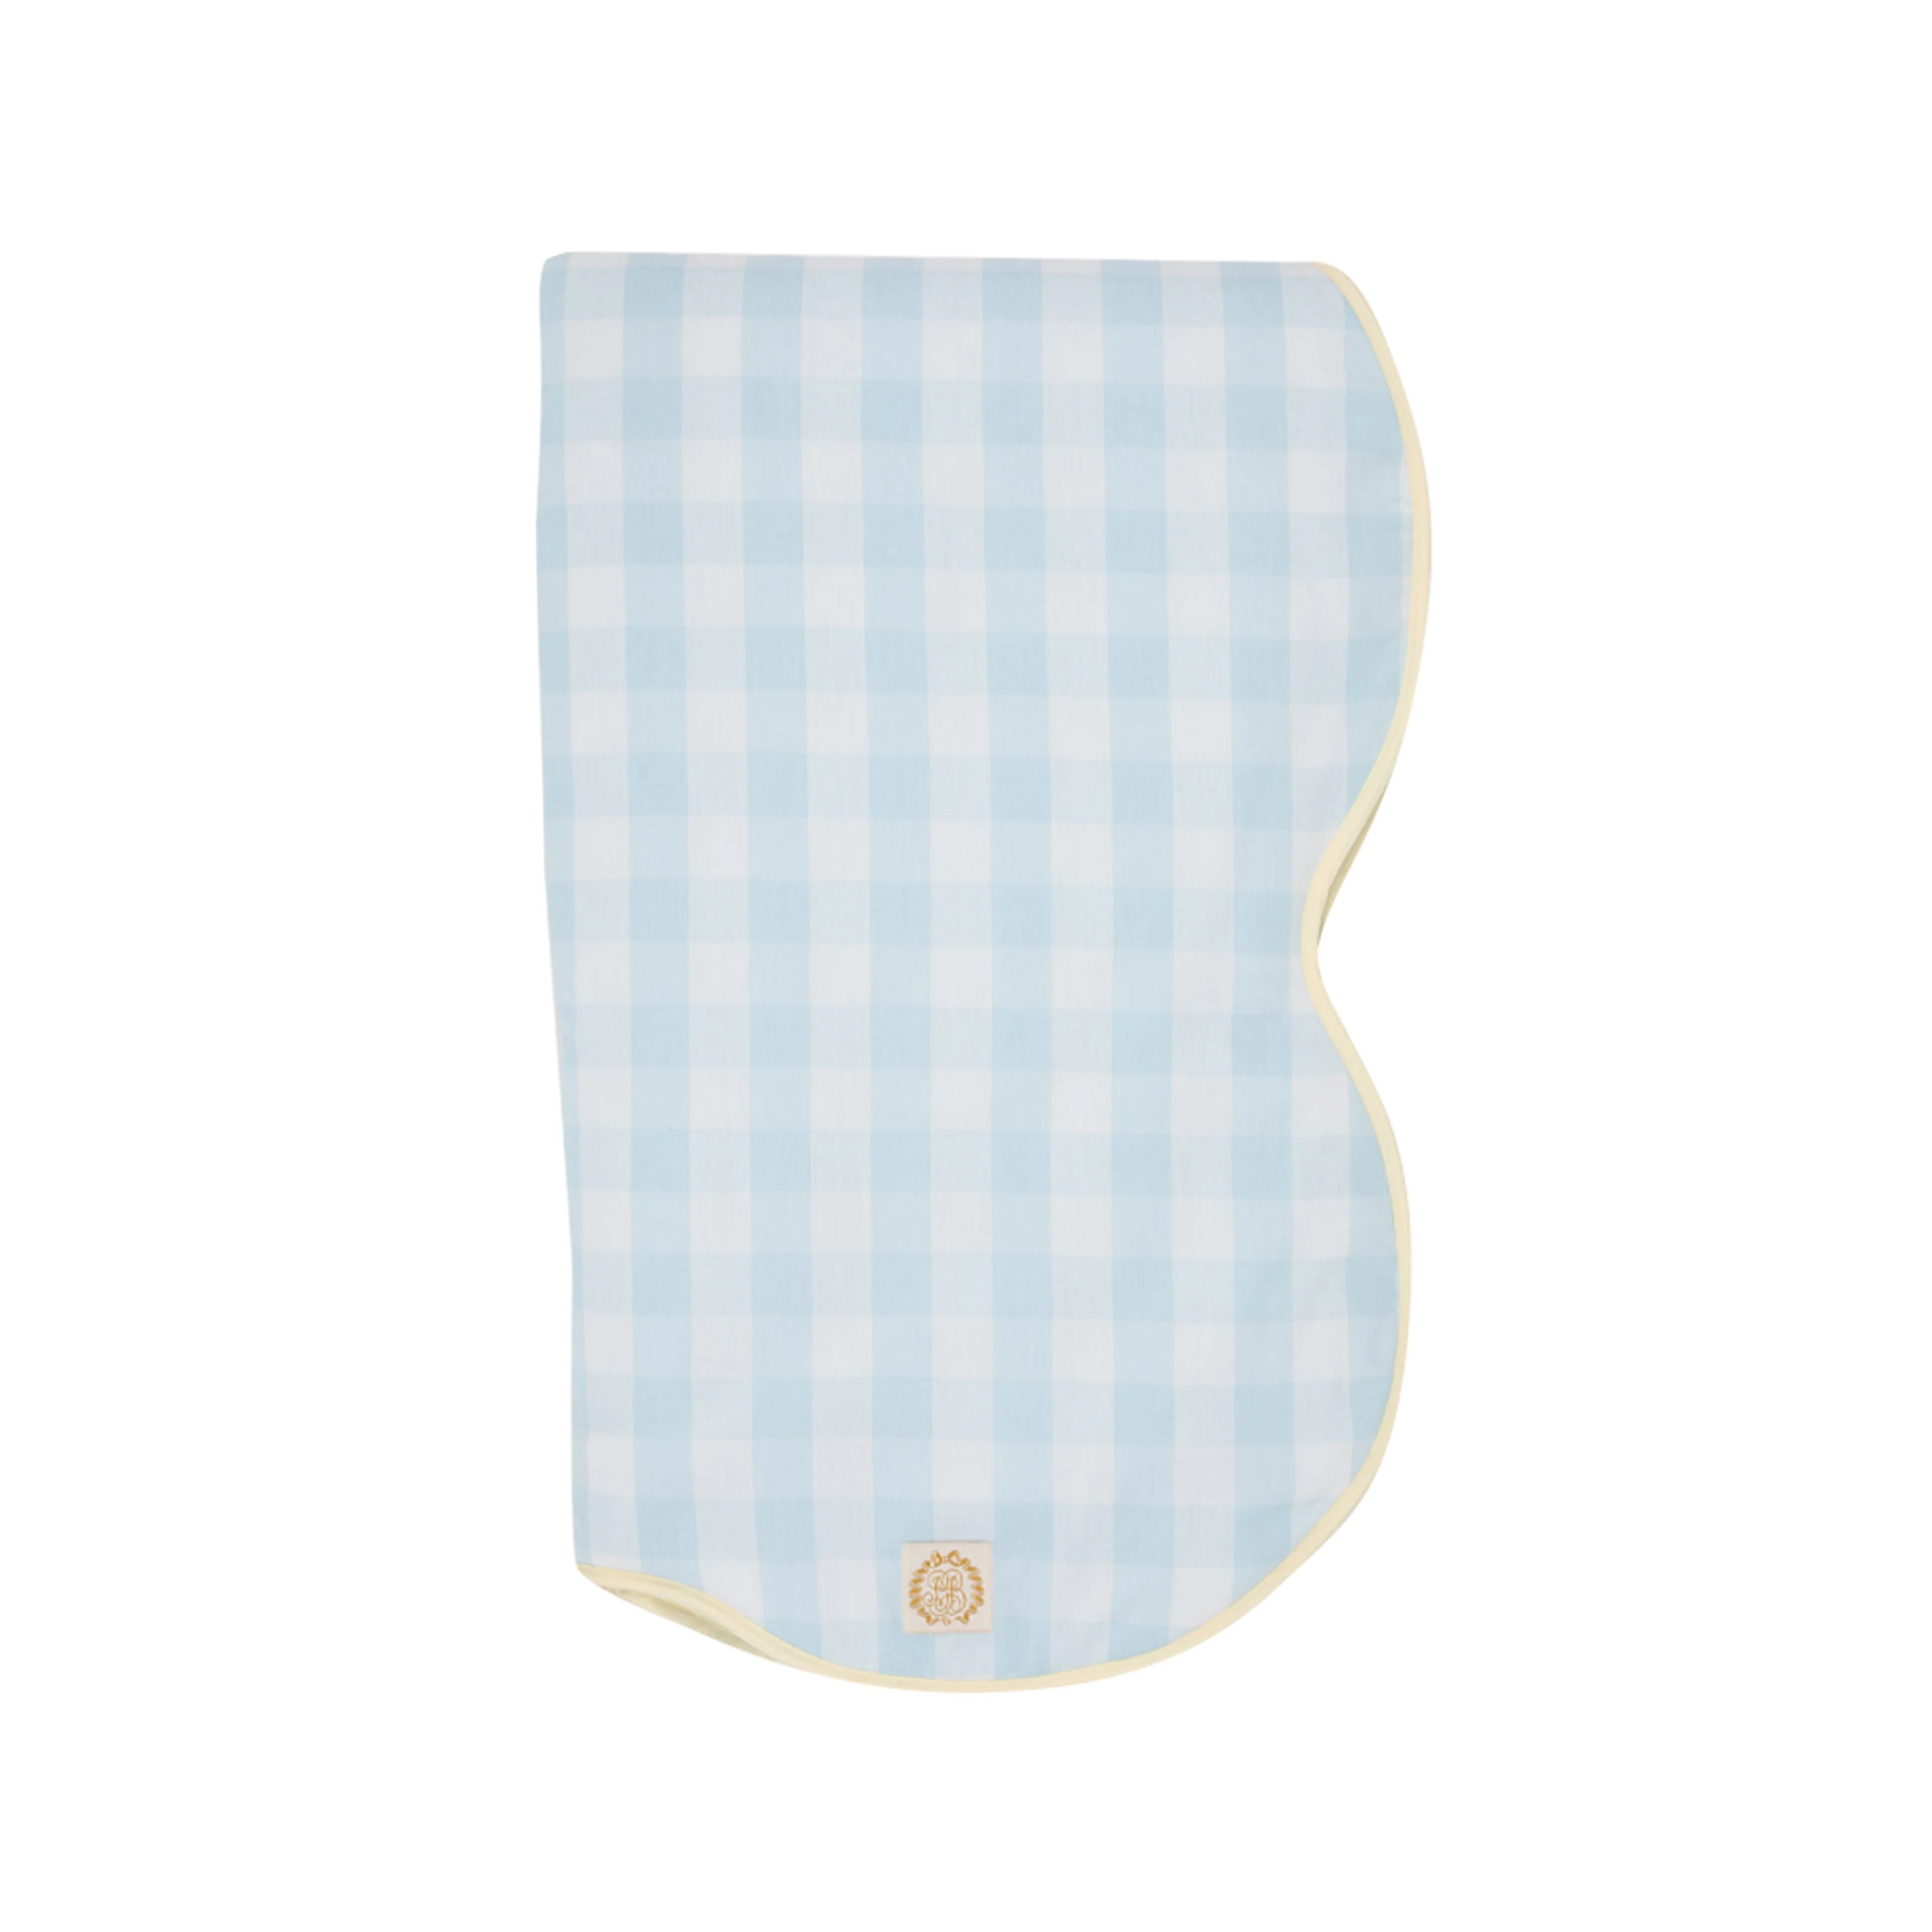 Tummy Time Throw - Buckhead Blue Chattanooga Check with Bellport Butter | The Beaufort Bonnet Company